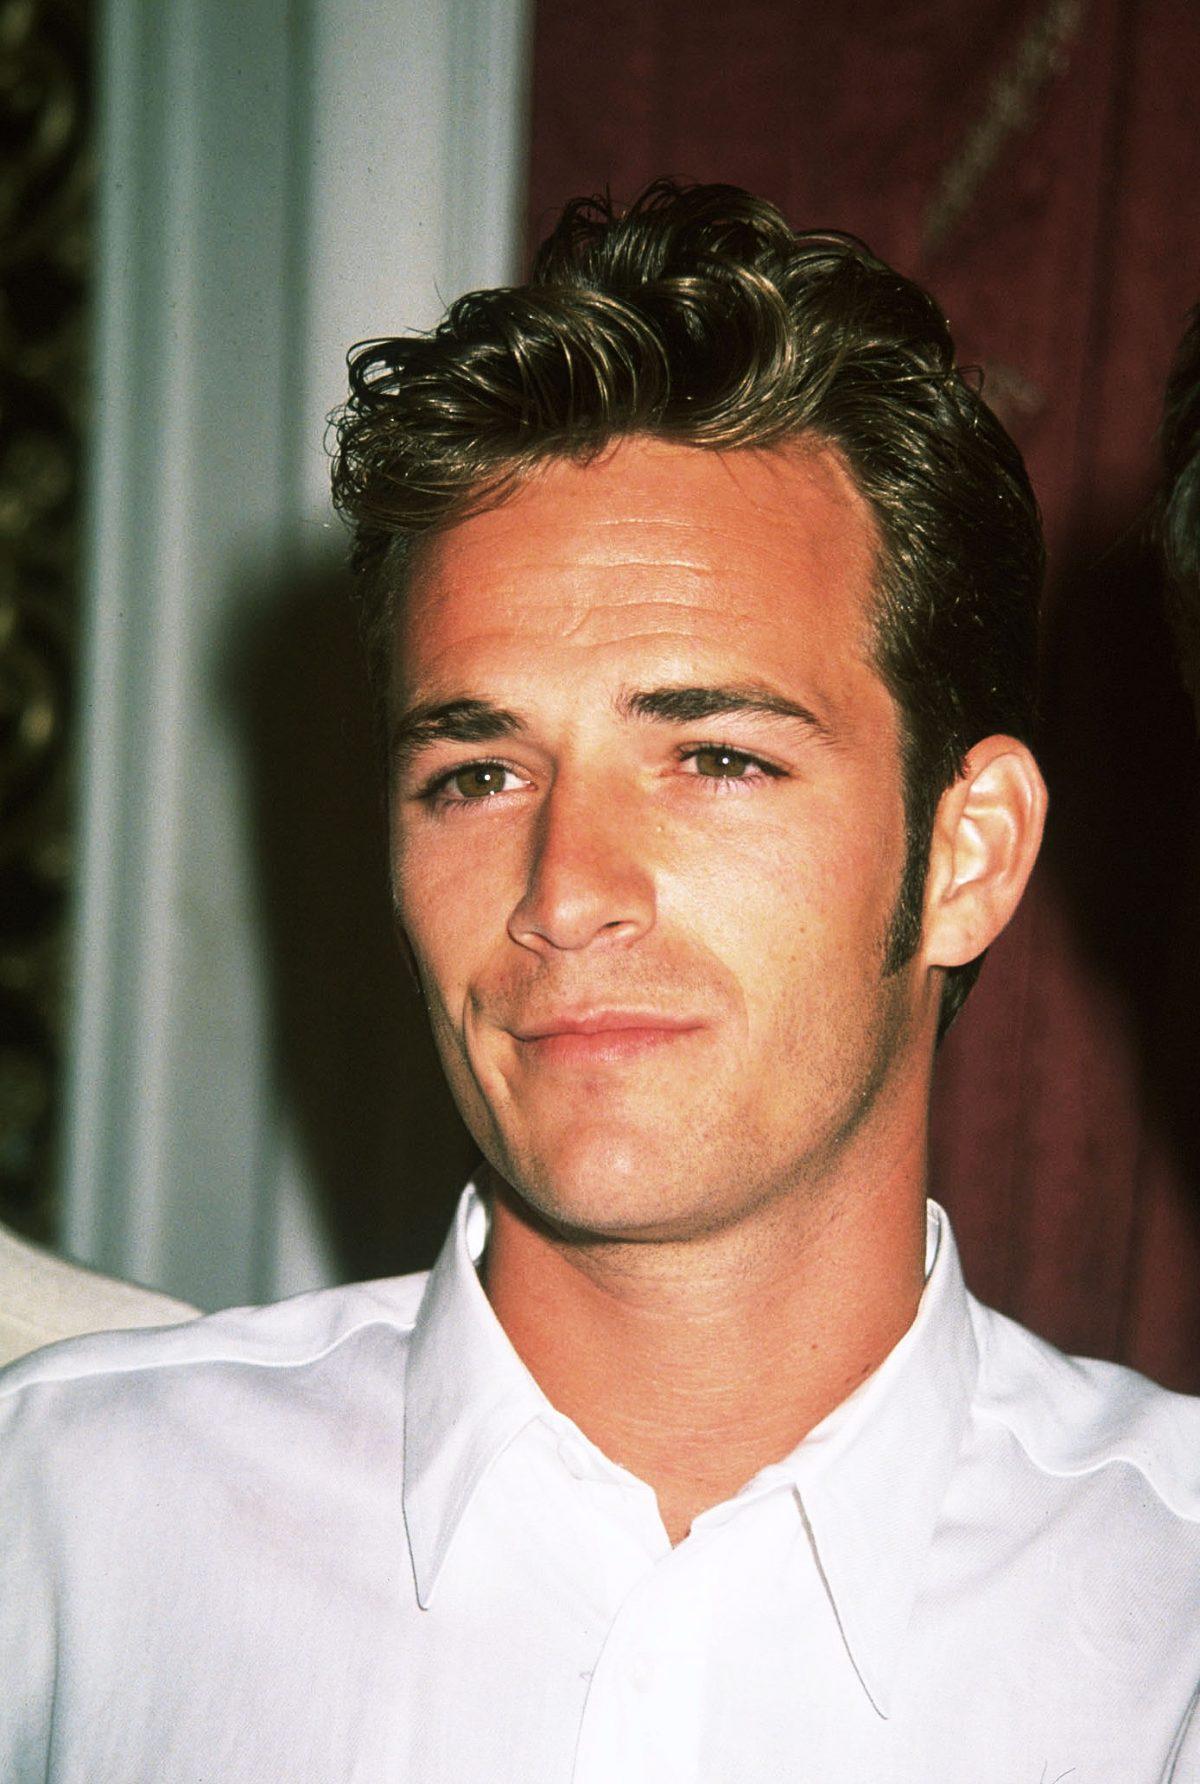 Undated file photo of Luke Perry. (Newsmakers)